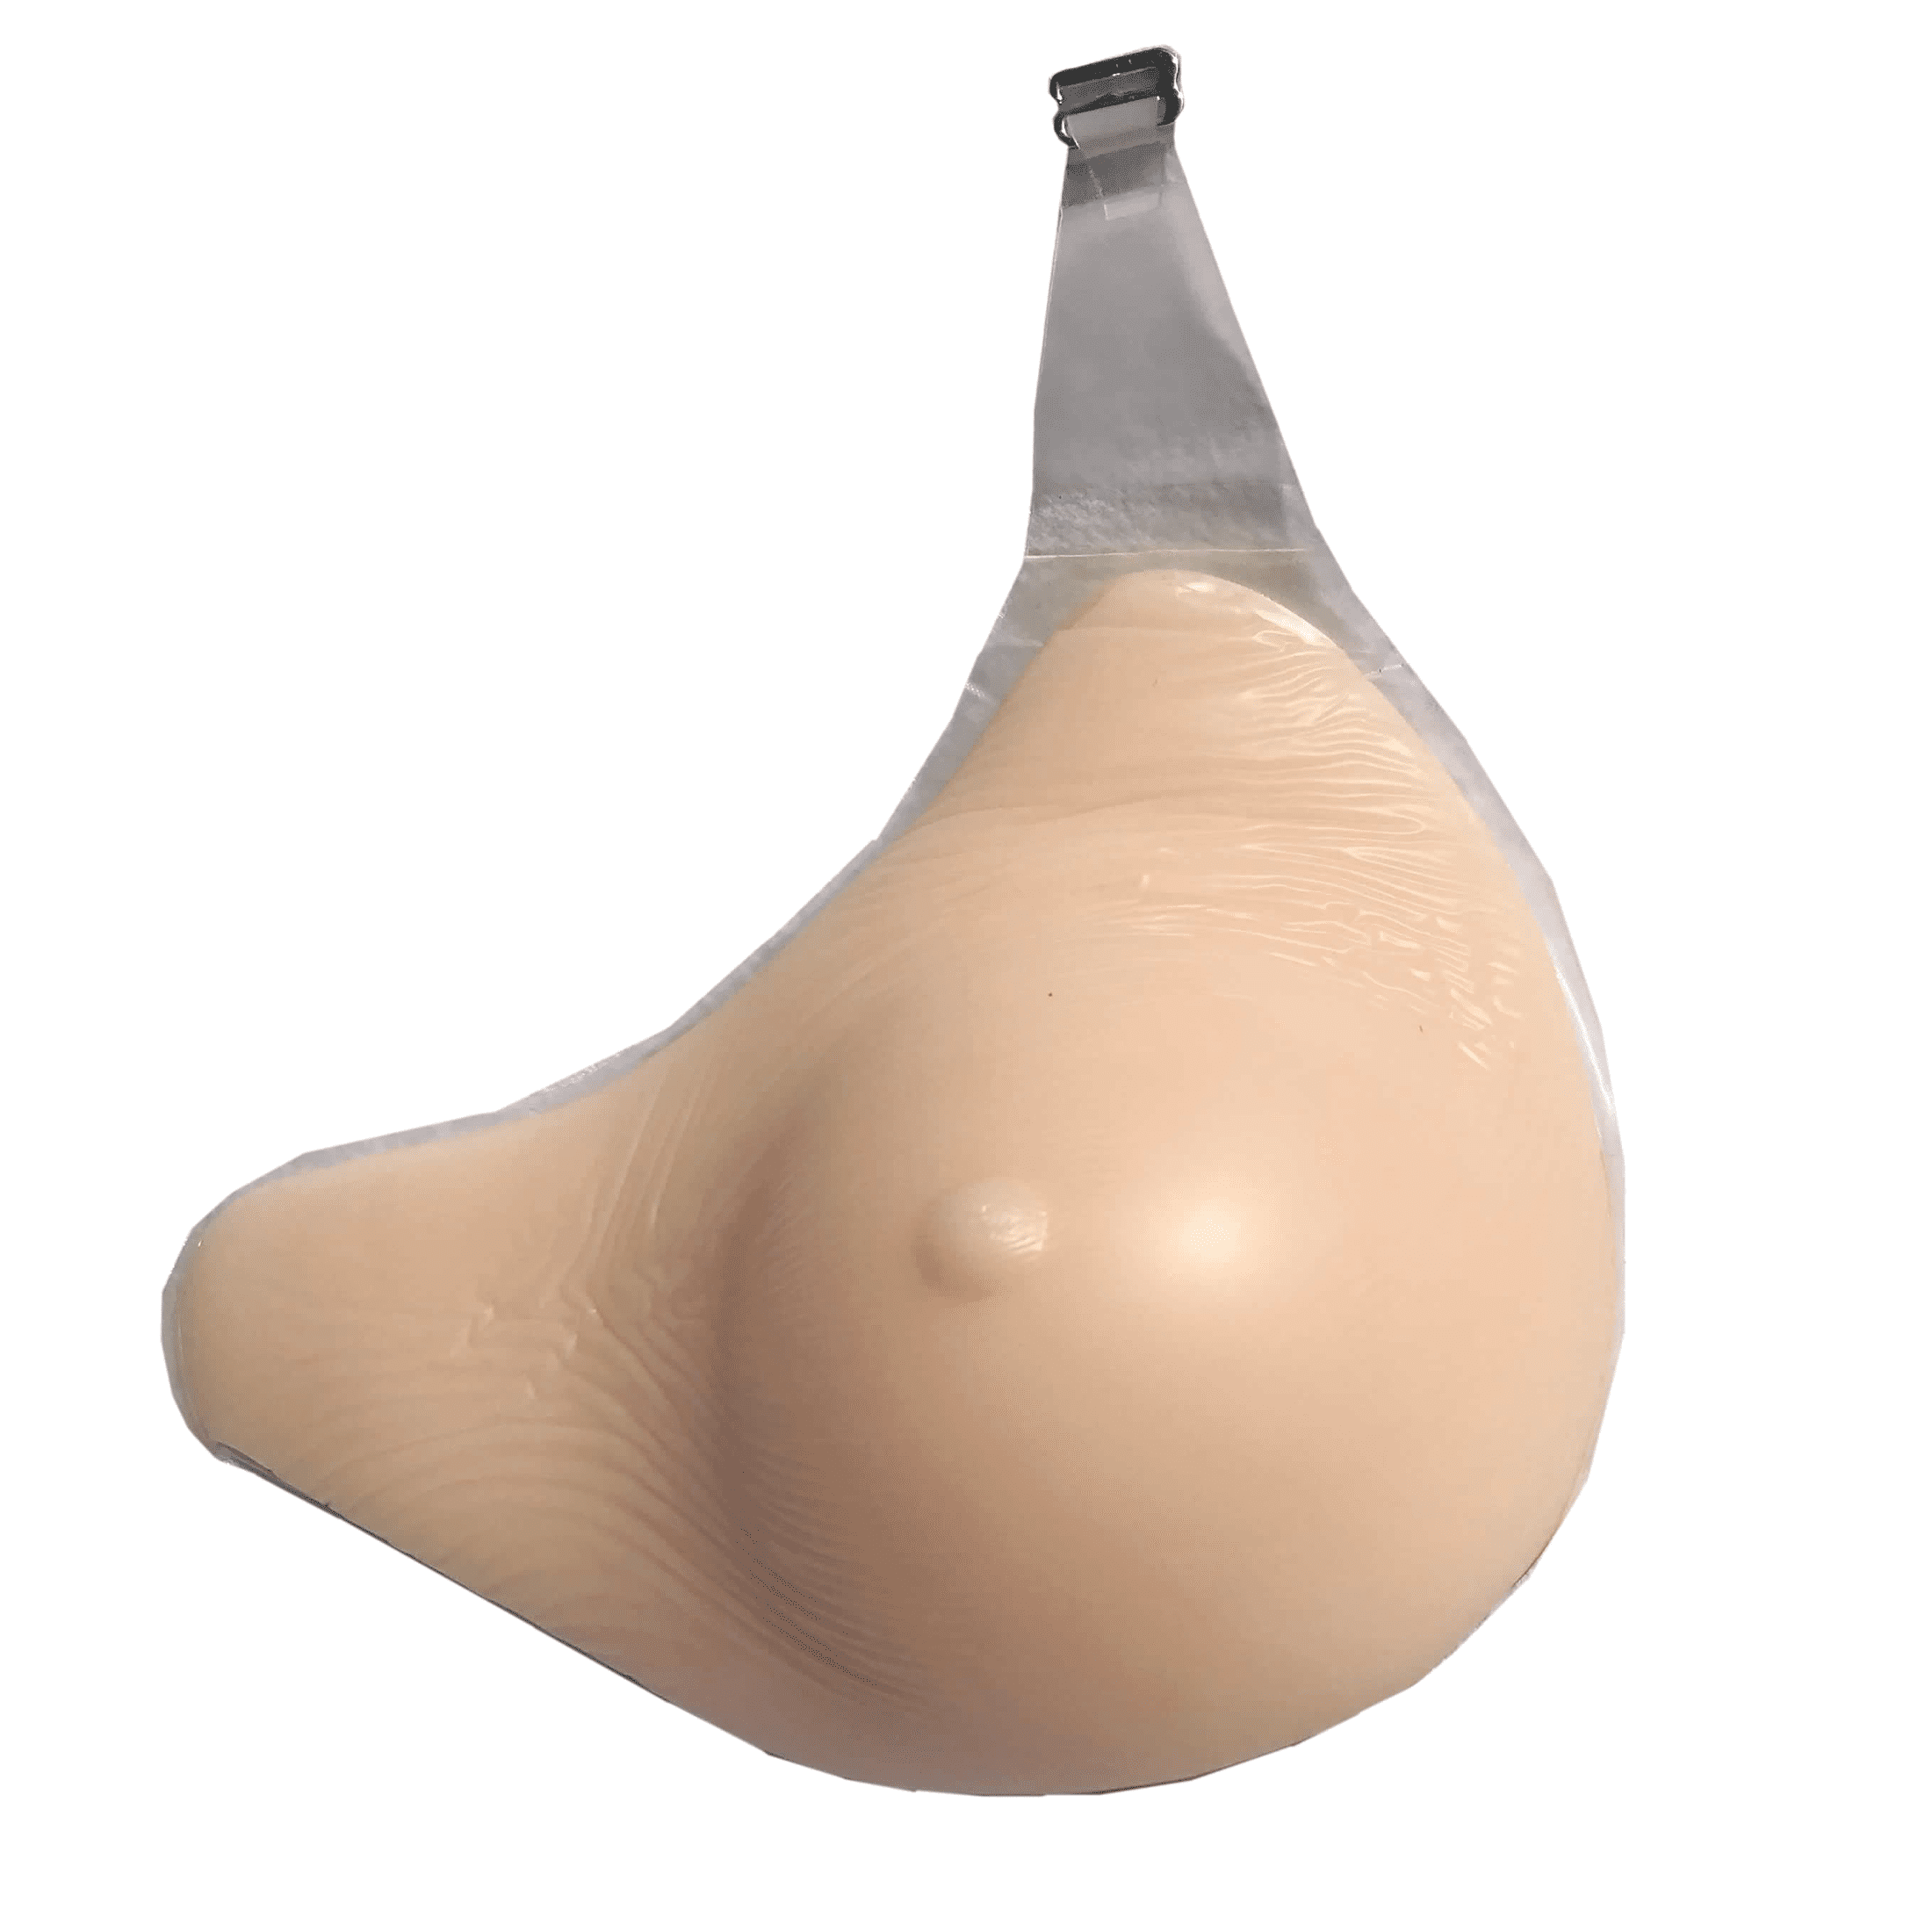 BIMEI Silicone Prosthesis Breast Forms with Hook Ghana